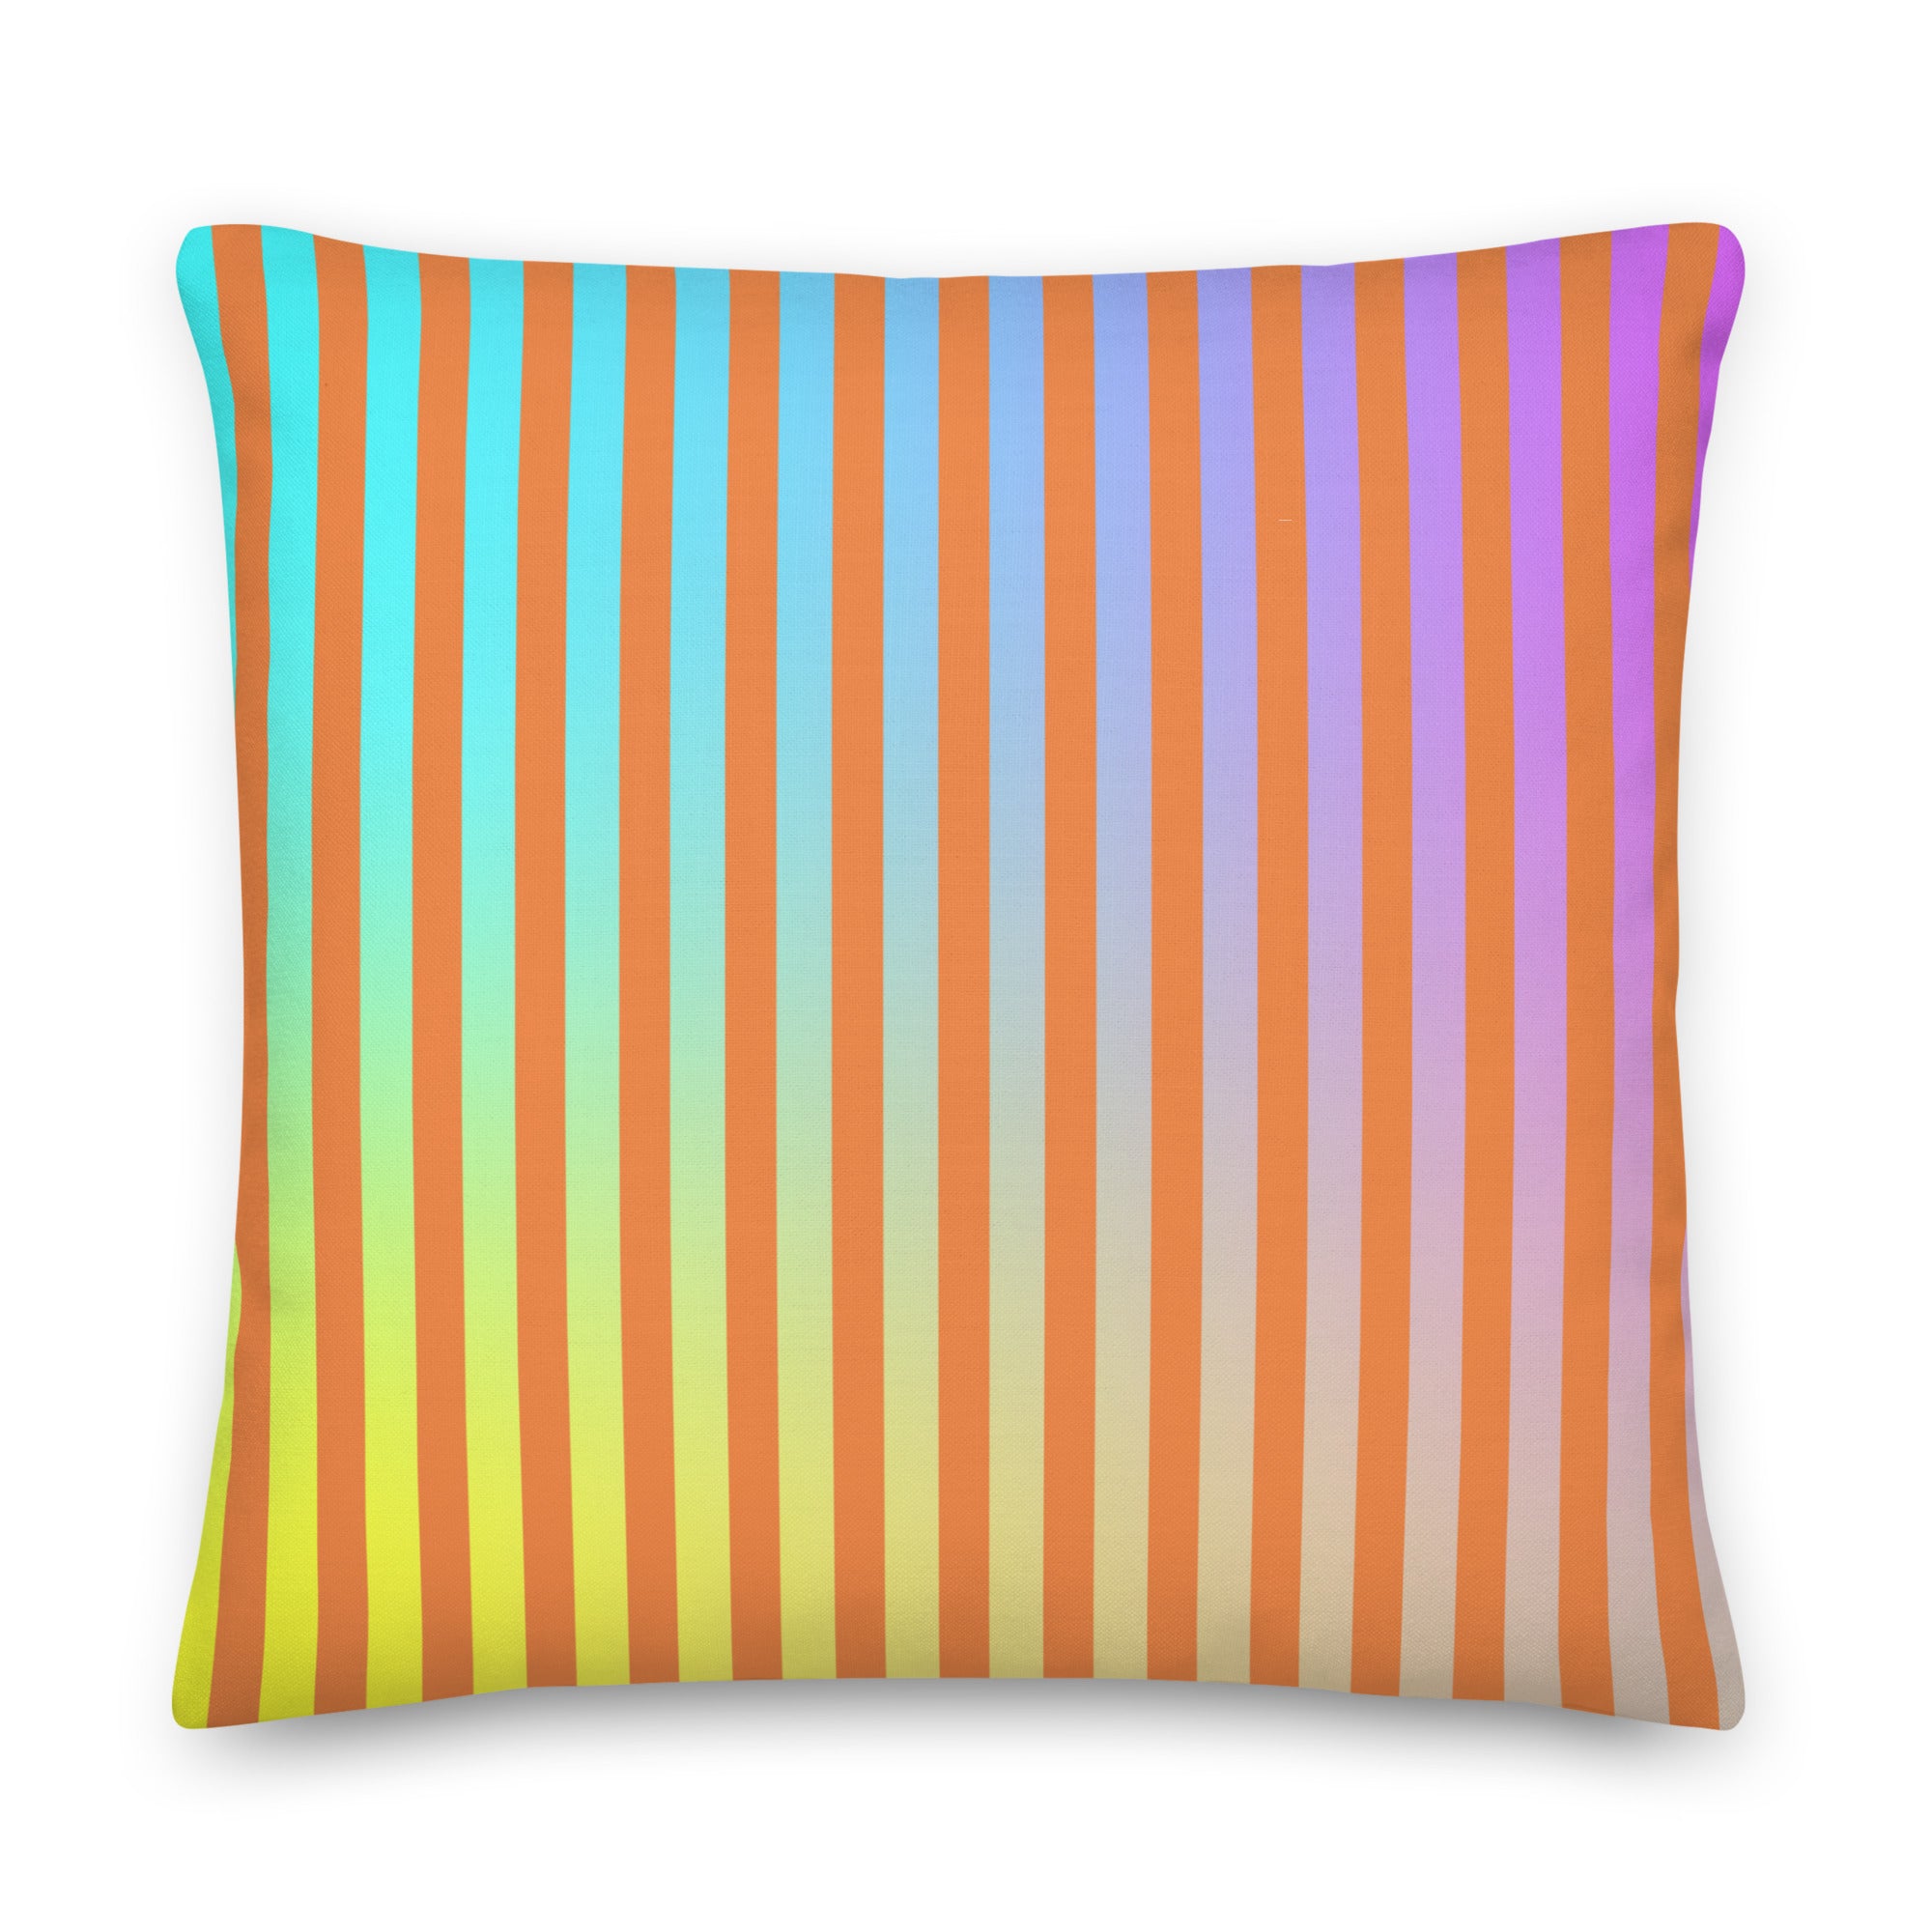 Radial and Stripes Colour Gradient Cushions